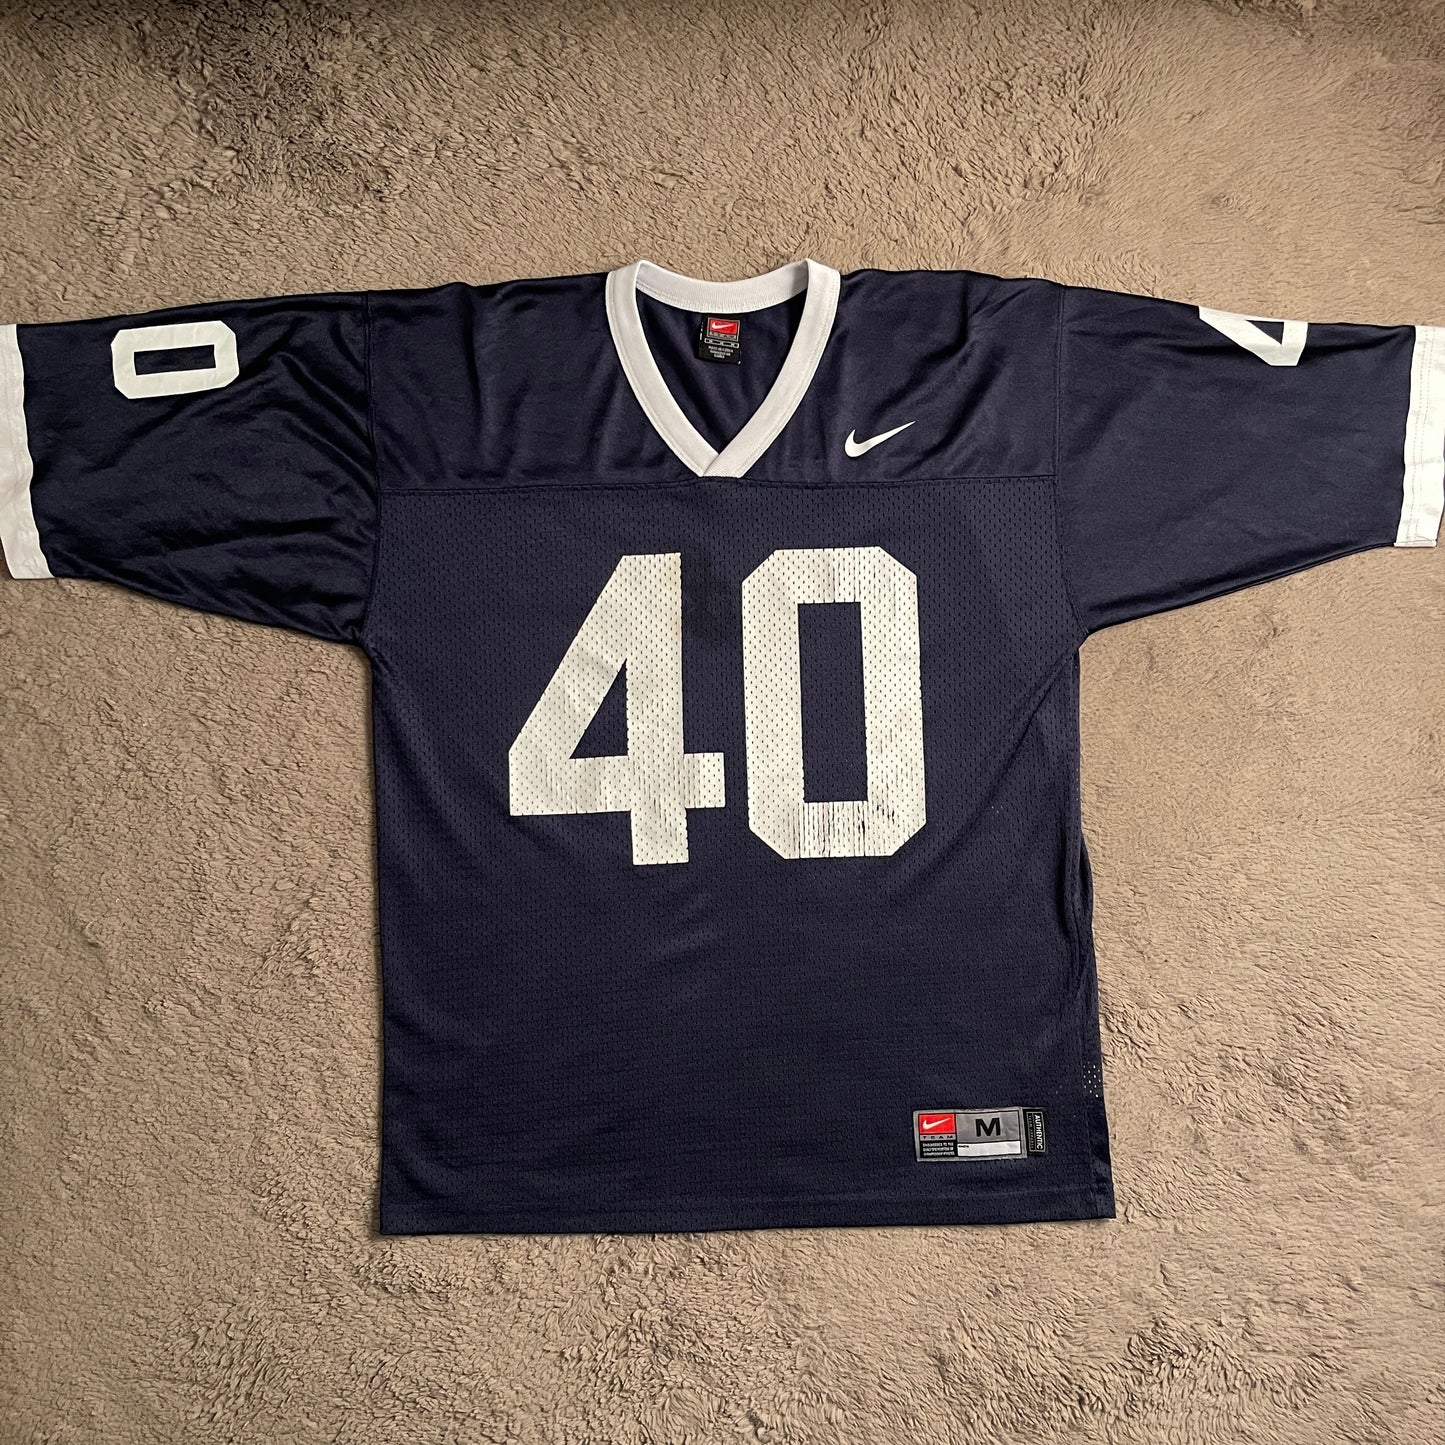 Vintage Nike Penn State Nittany Lions Football Jersey (M)